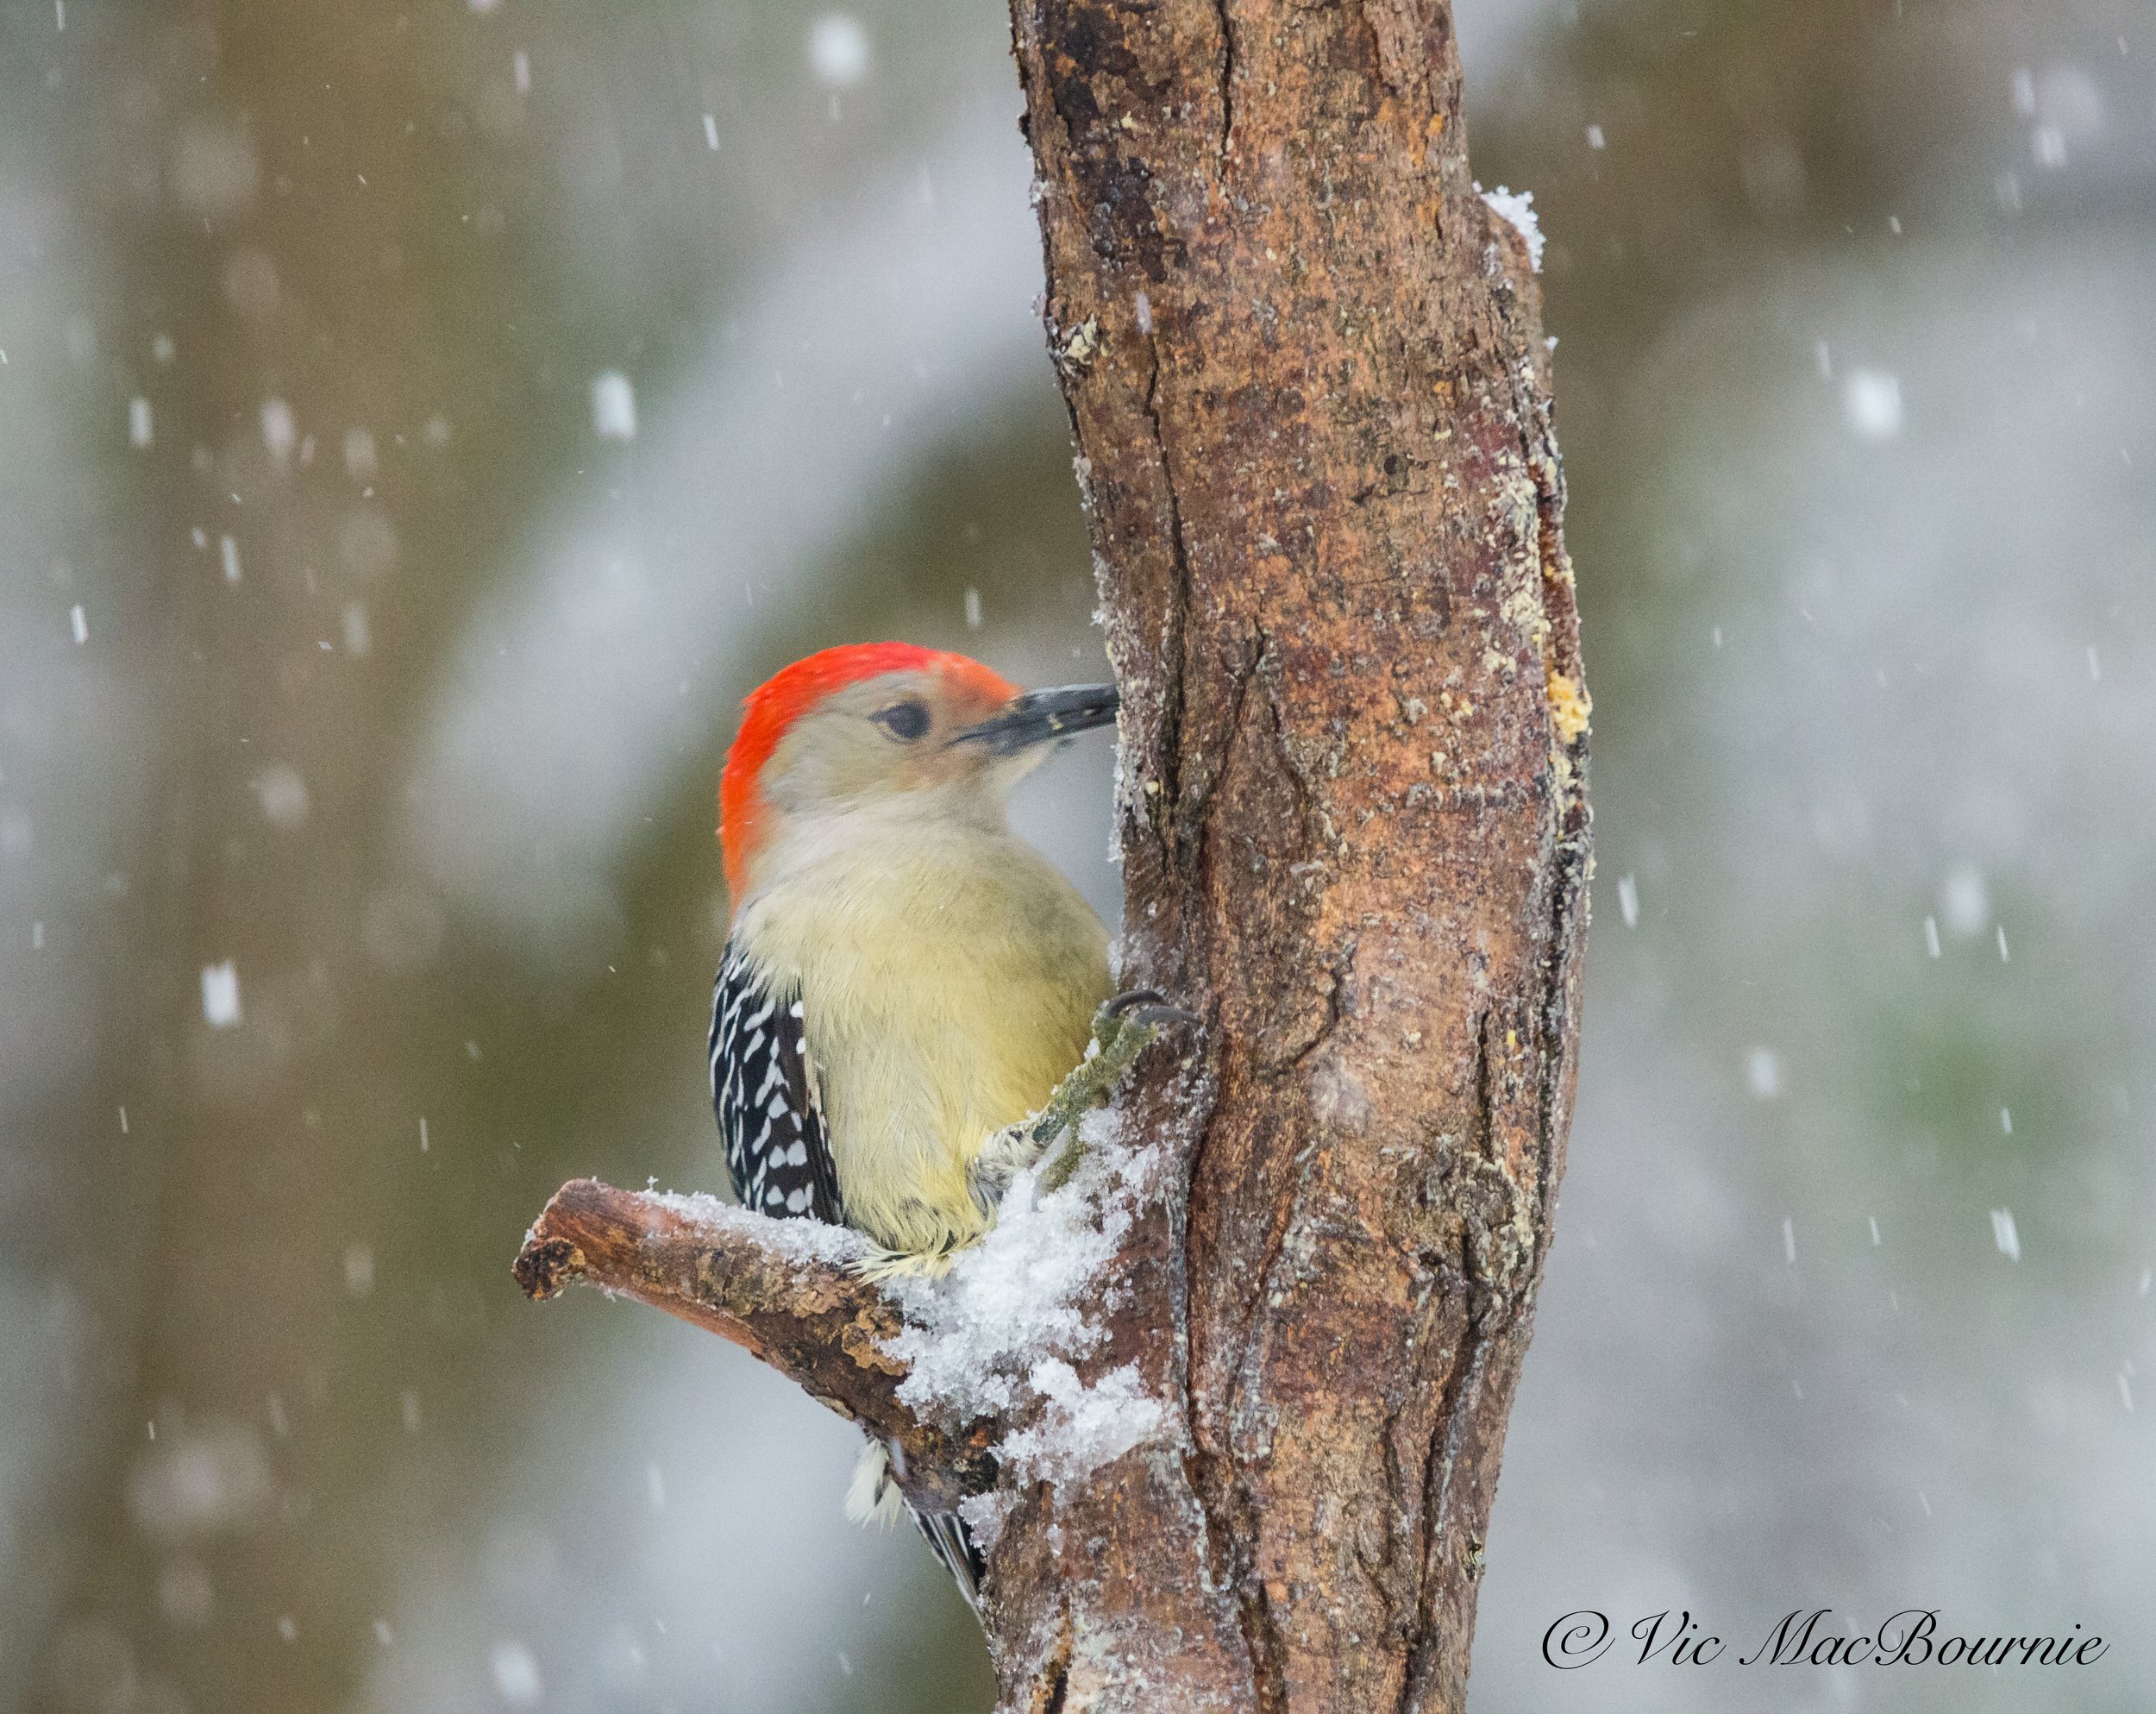 A male Red-bellied woodpecker working at a DIY suet feeder filled with bark butter.